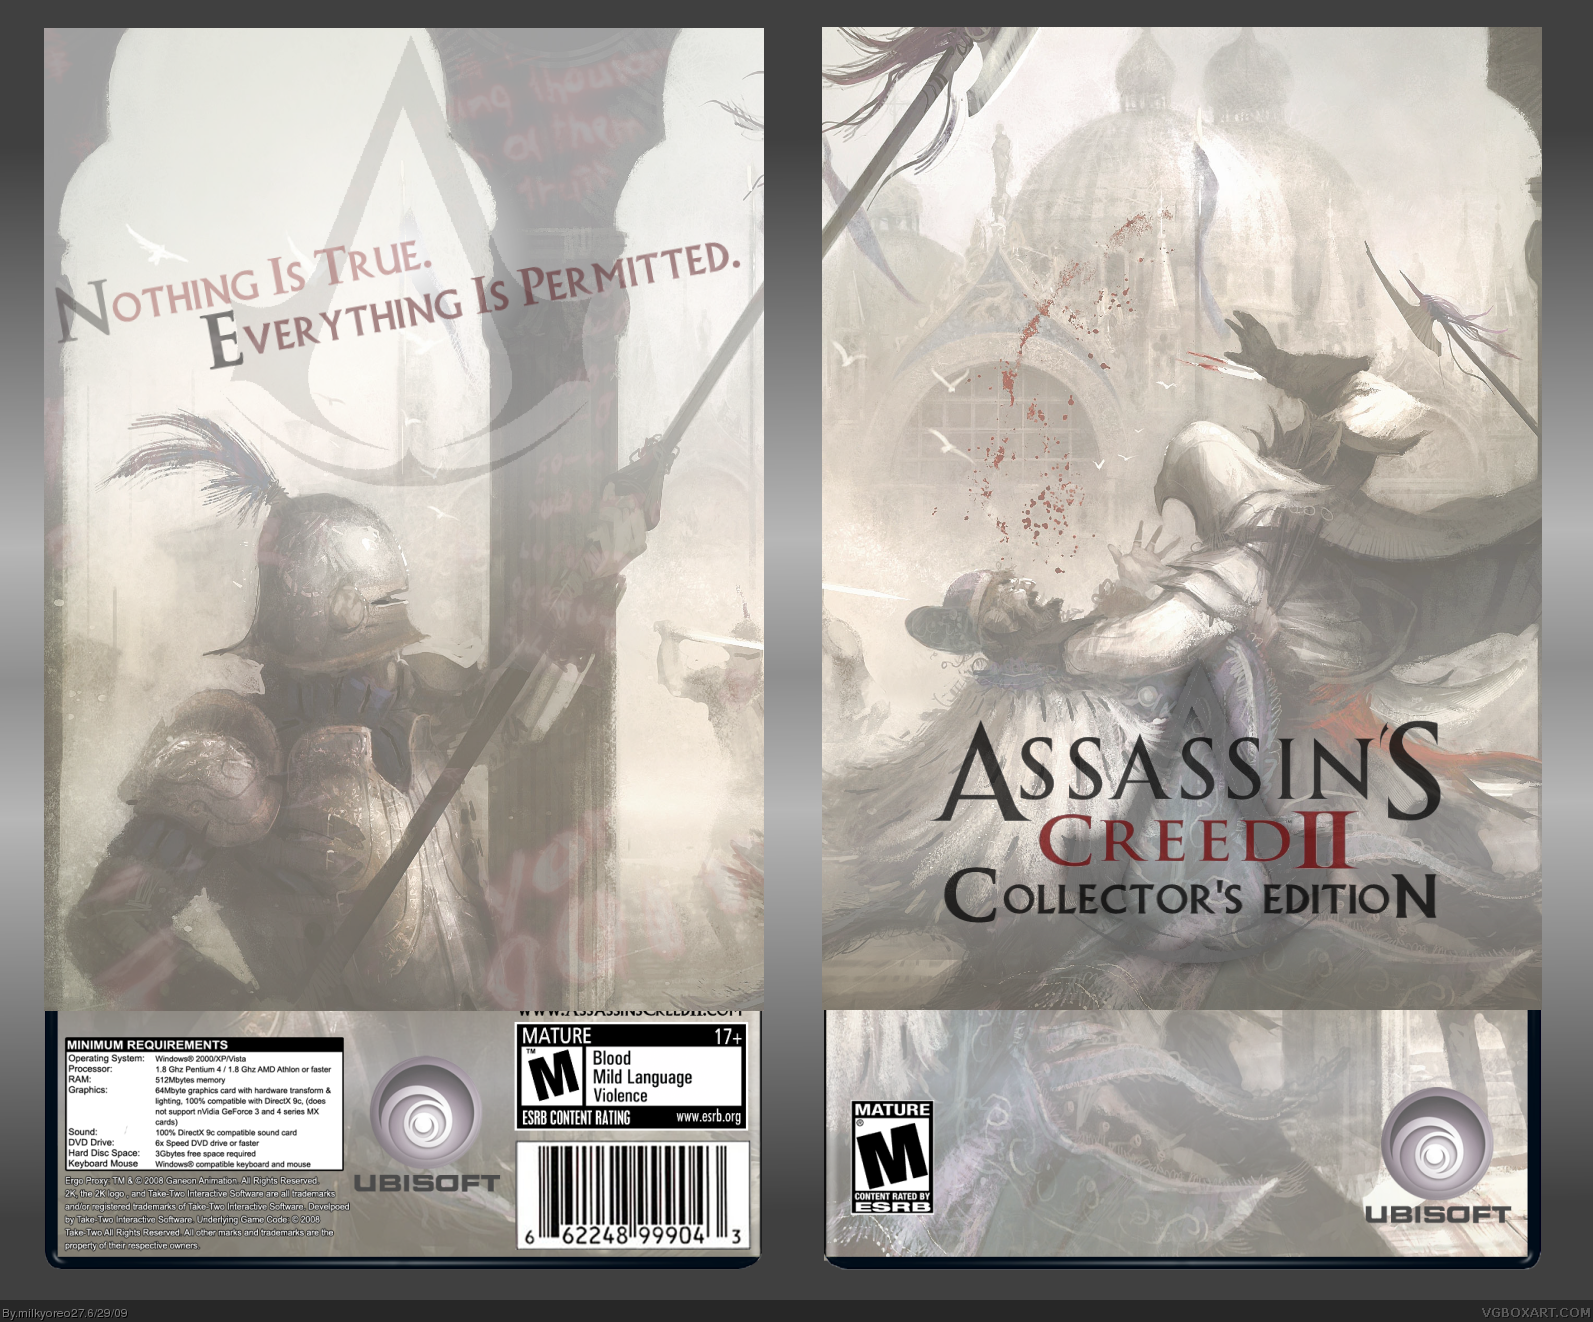 Assassin's Creed II: Collector's Edition box cover